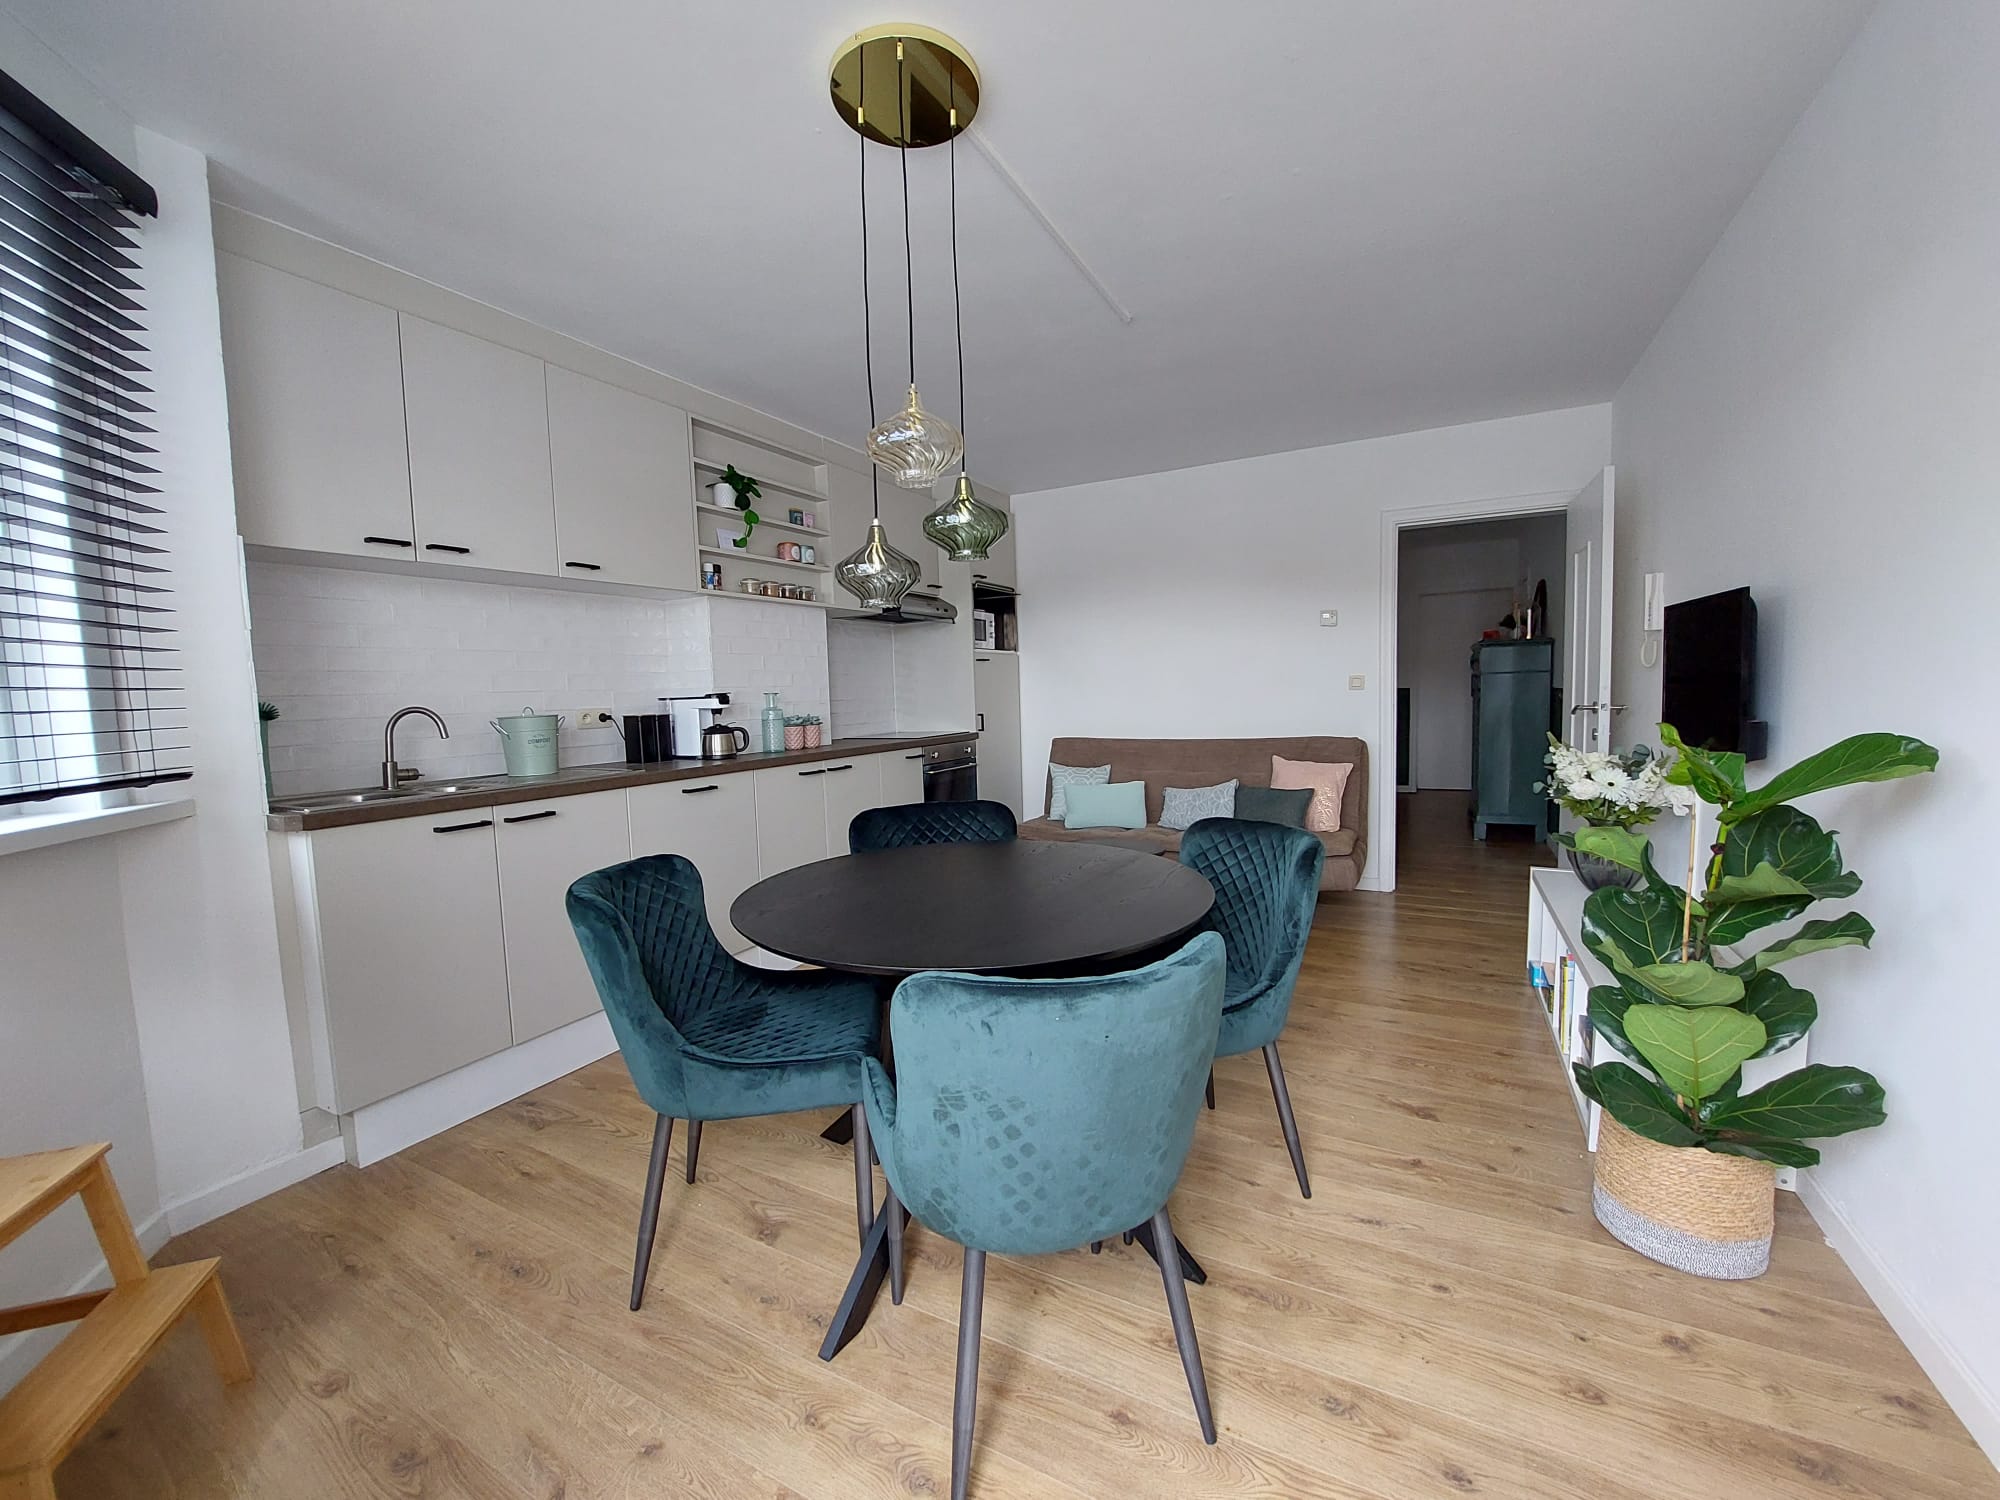 Albert is a furnished expat flat in Blankenberge. It is an entry ready accommodation near the sea. 